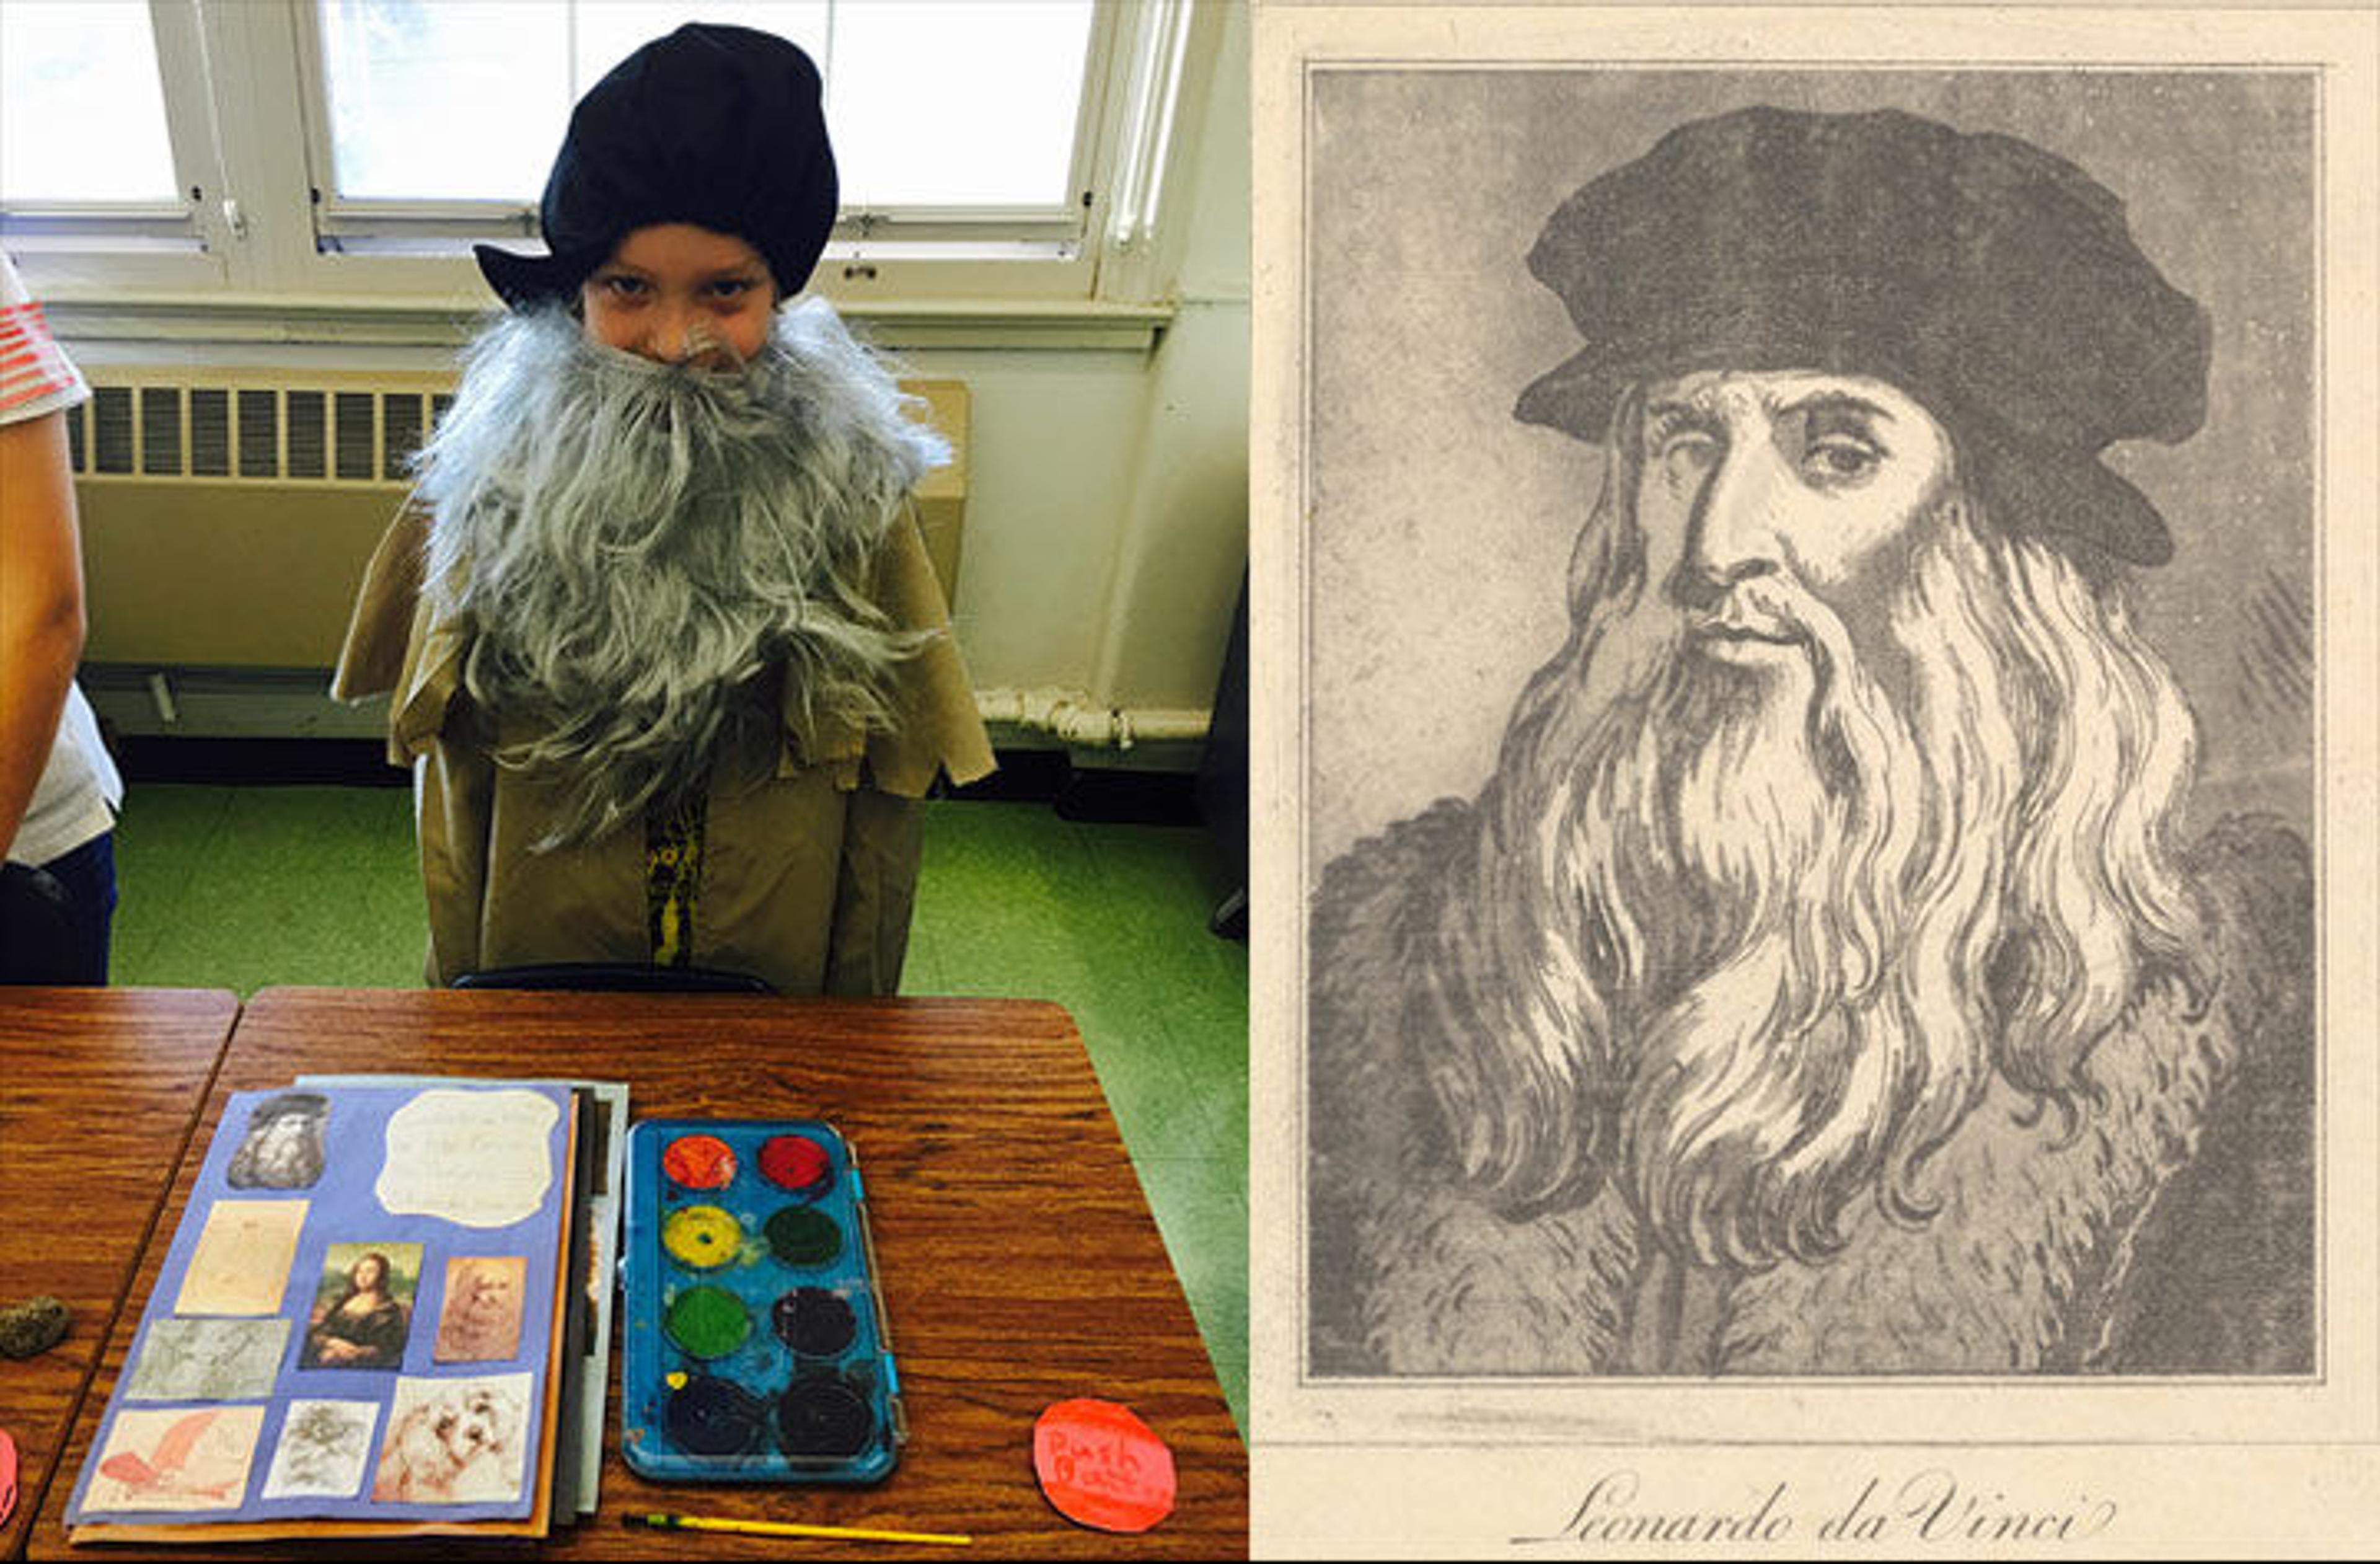 Mashup of Toby's costume and Portrait of Leonardo da Vinci (from Characaturas by Leonardo da Vinci, from Drawings by Wincelslaus Hollar, out of the Portland Museum)